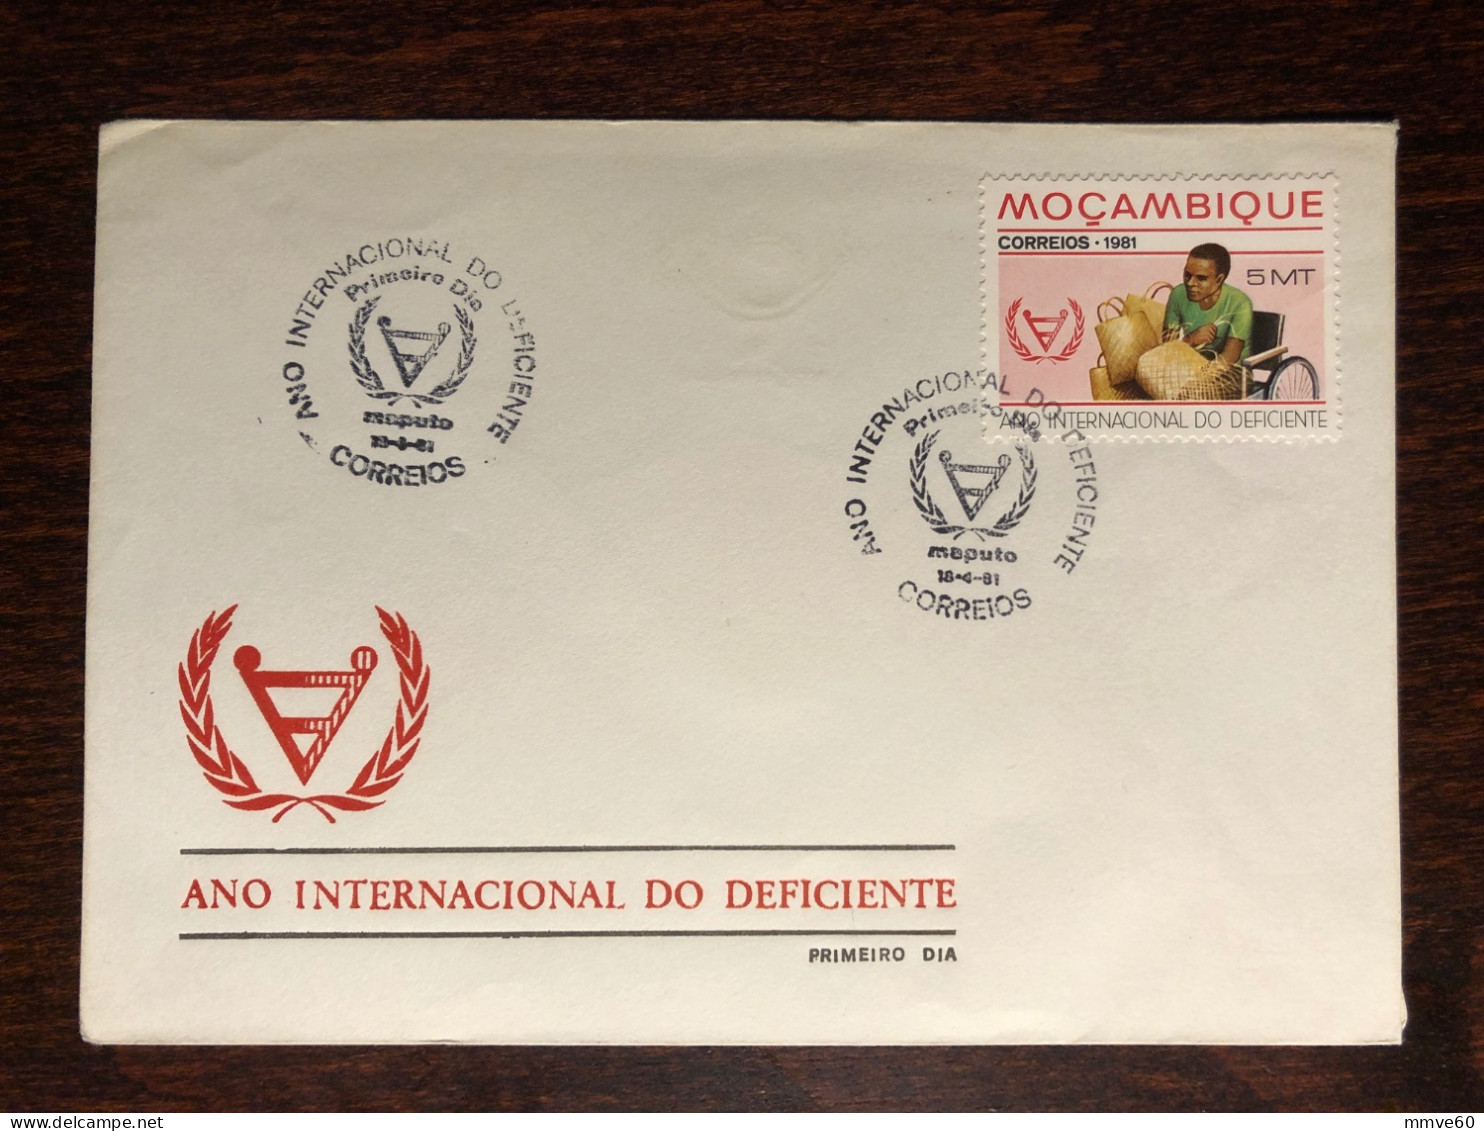 MOZAMBIQUE FDC COVER 1981 YEAR DISABLED PEOPLE HEALTH MEDICINE - Mozambique